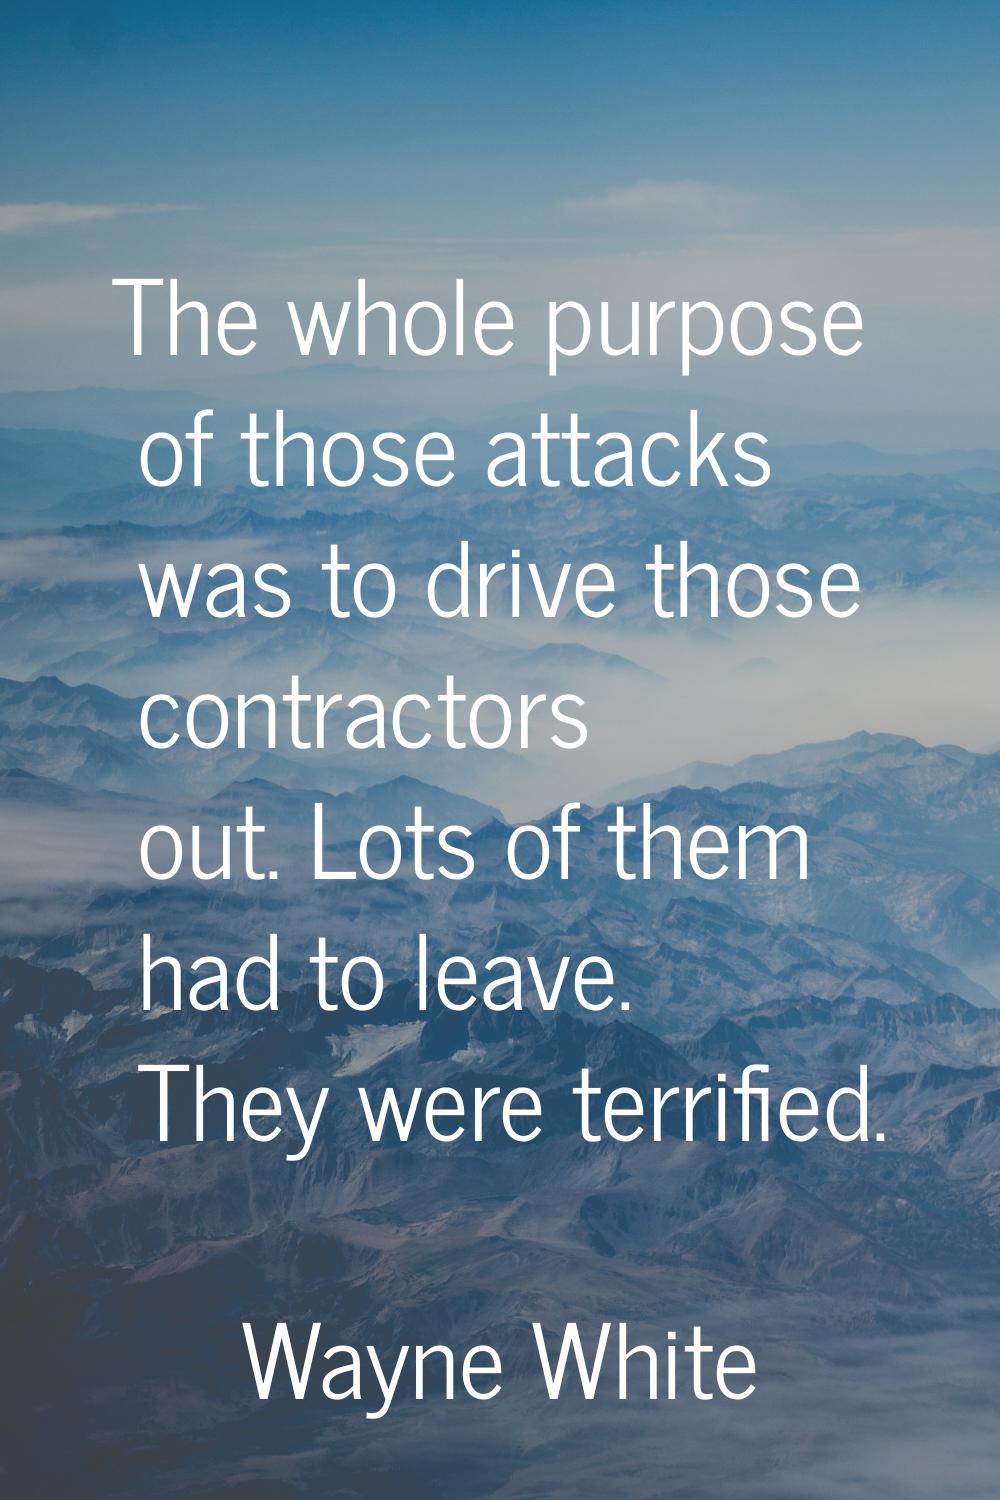 The whole purpose of those attacks was to drive those contractors out. Lots of them had to leave. T